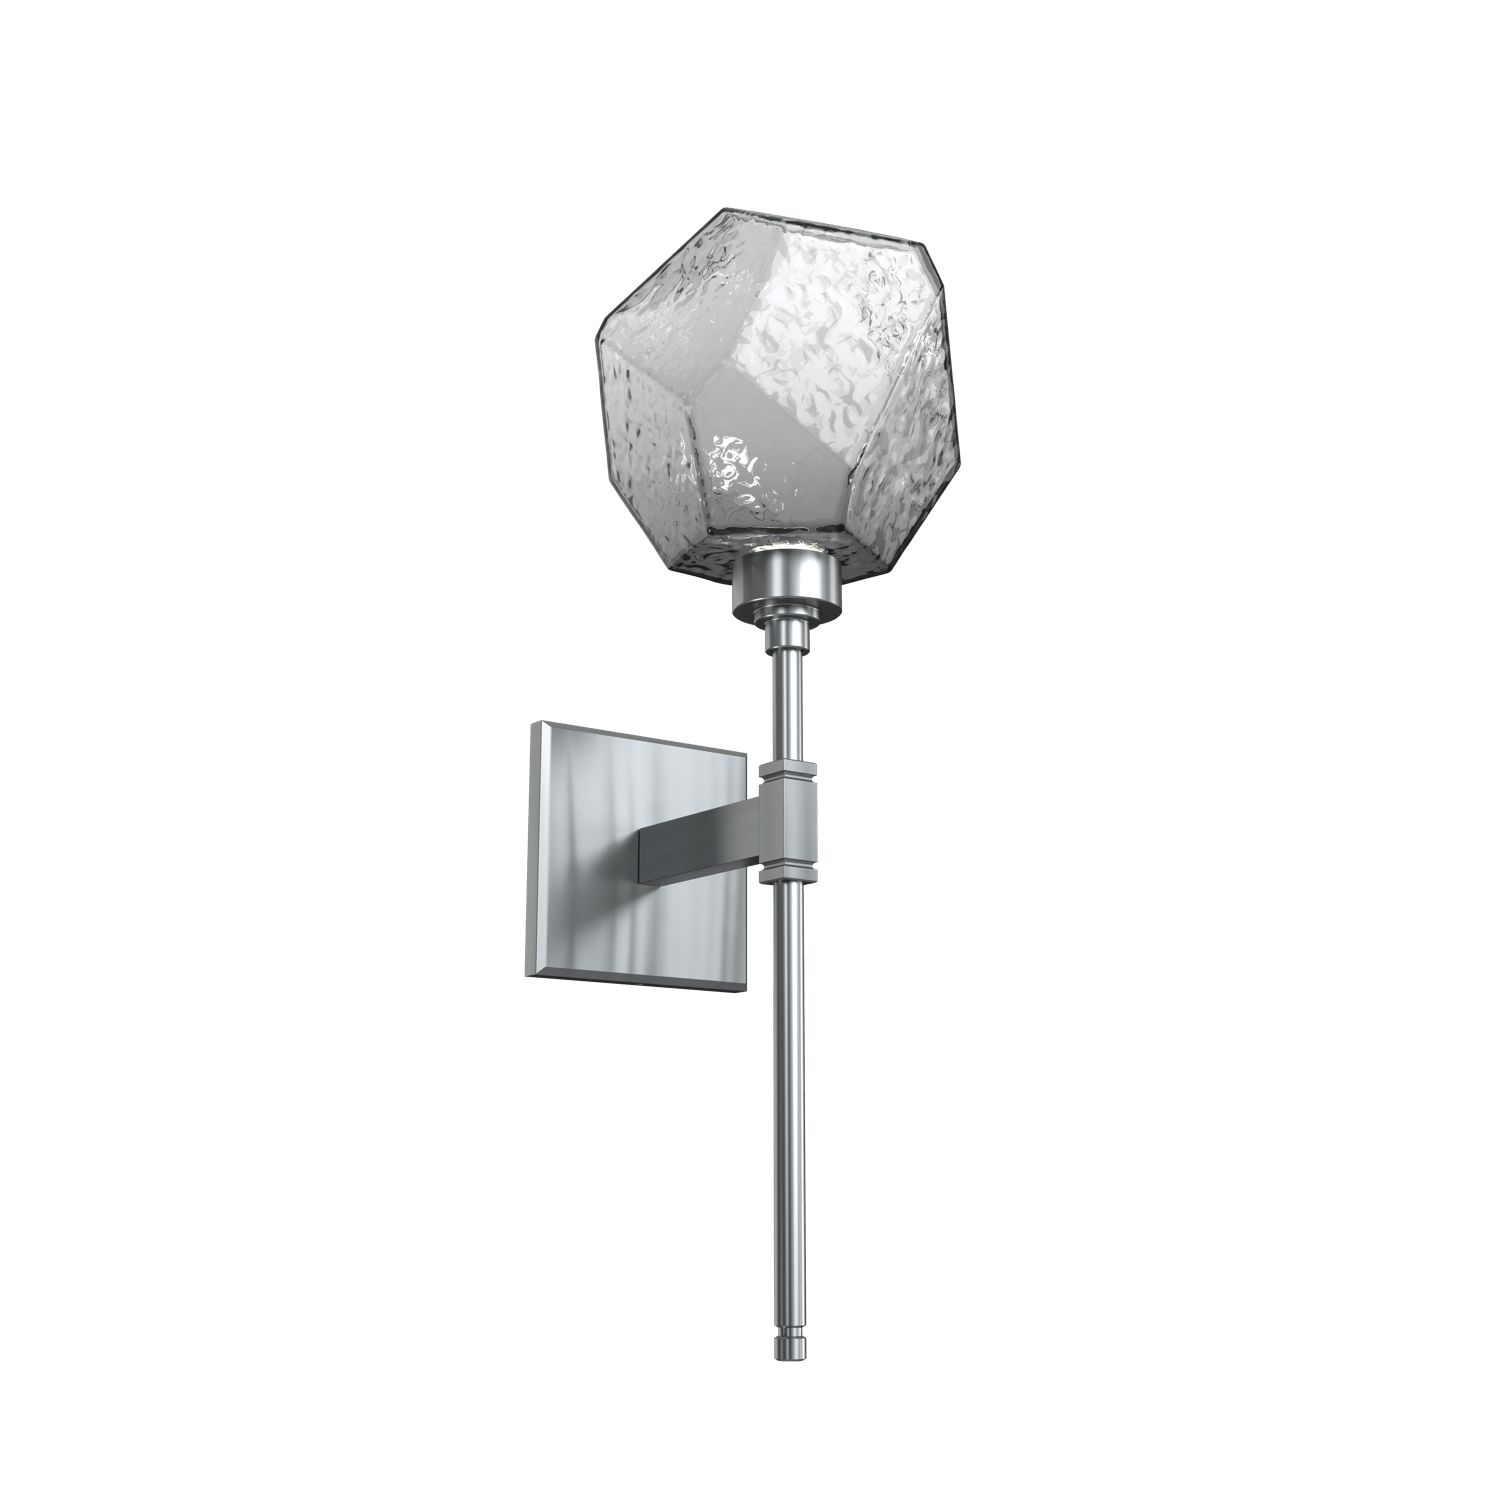 IDB0039-08-SN-S-Hammerton-Studio-Gem-belvedere-wall-sconce-with-satin-nickel-finish-and-smoke-blown-glass-shades-and-LED-lamping